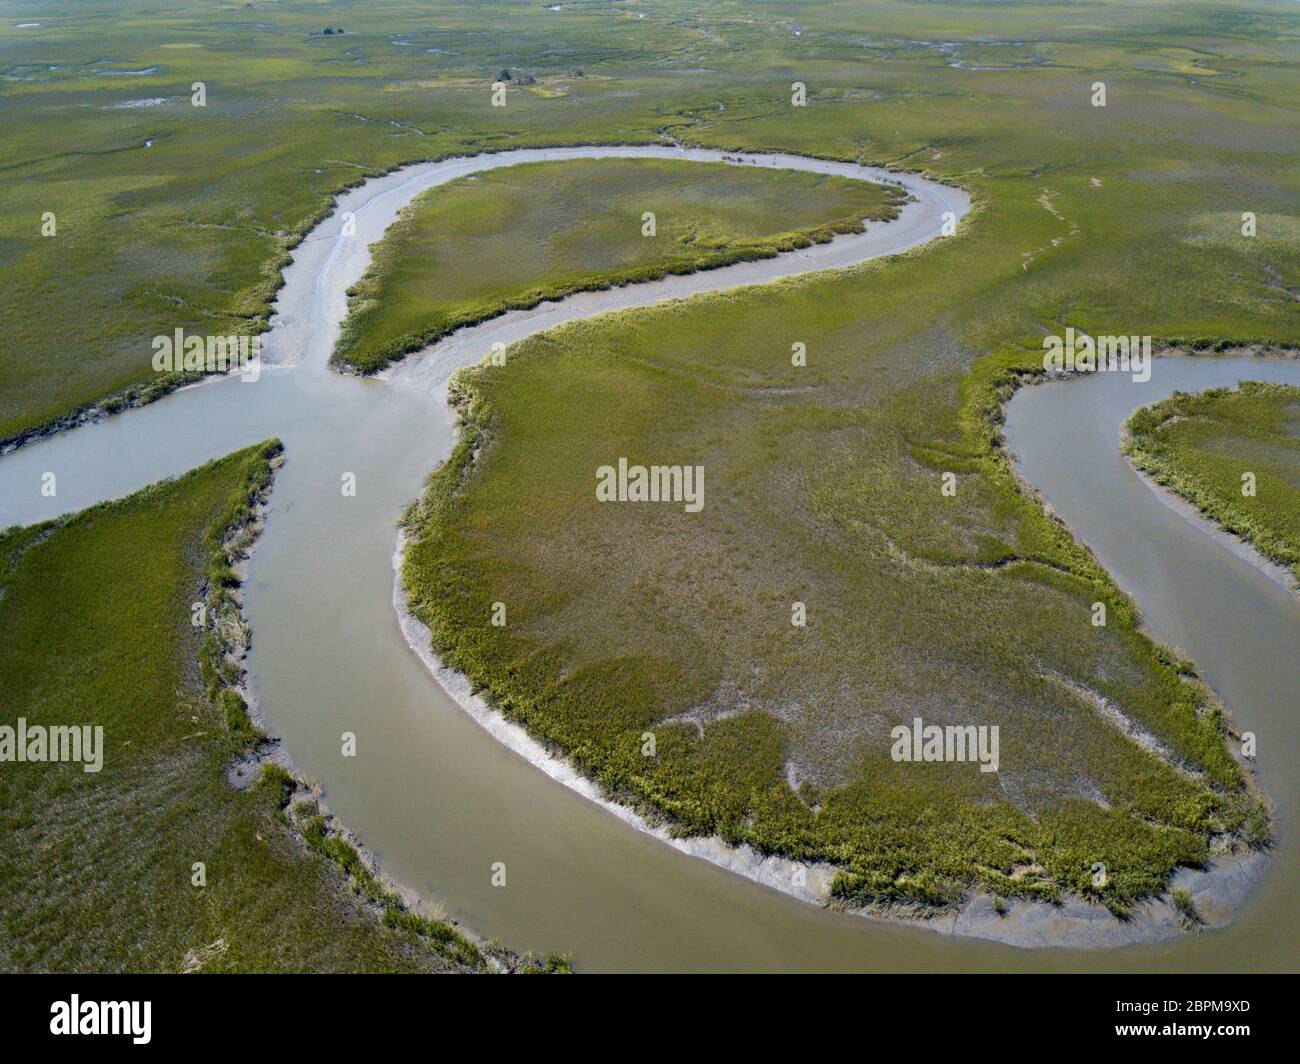 Aerial view of meandering tidal estuary and salt marsh on the coast of South Carolina, USA. Stock Photo